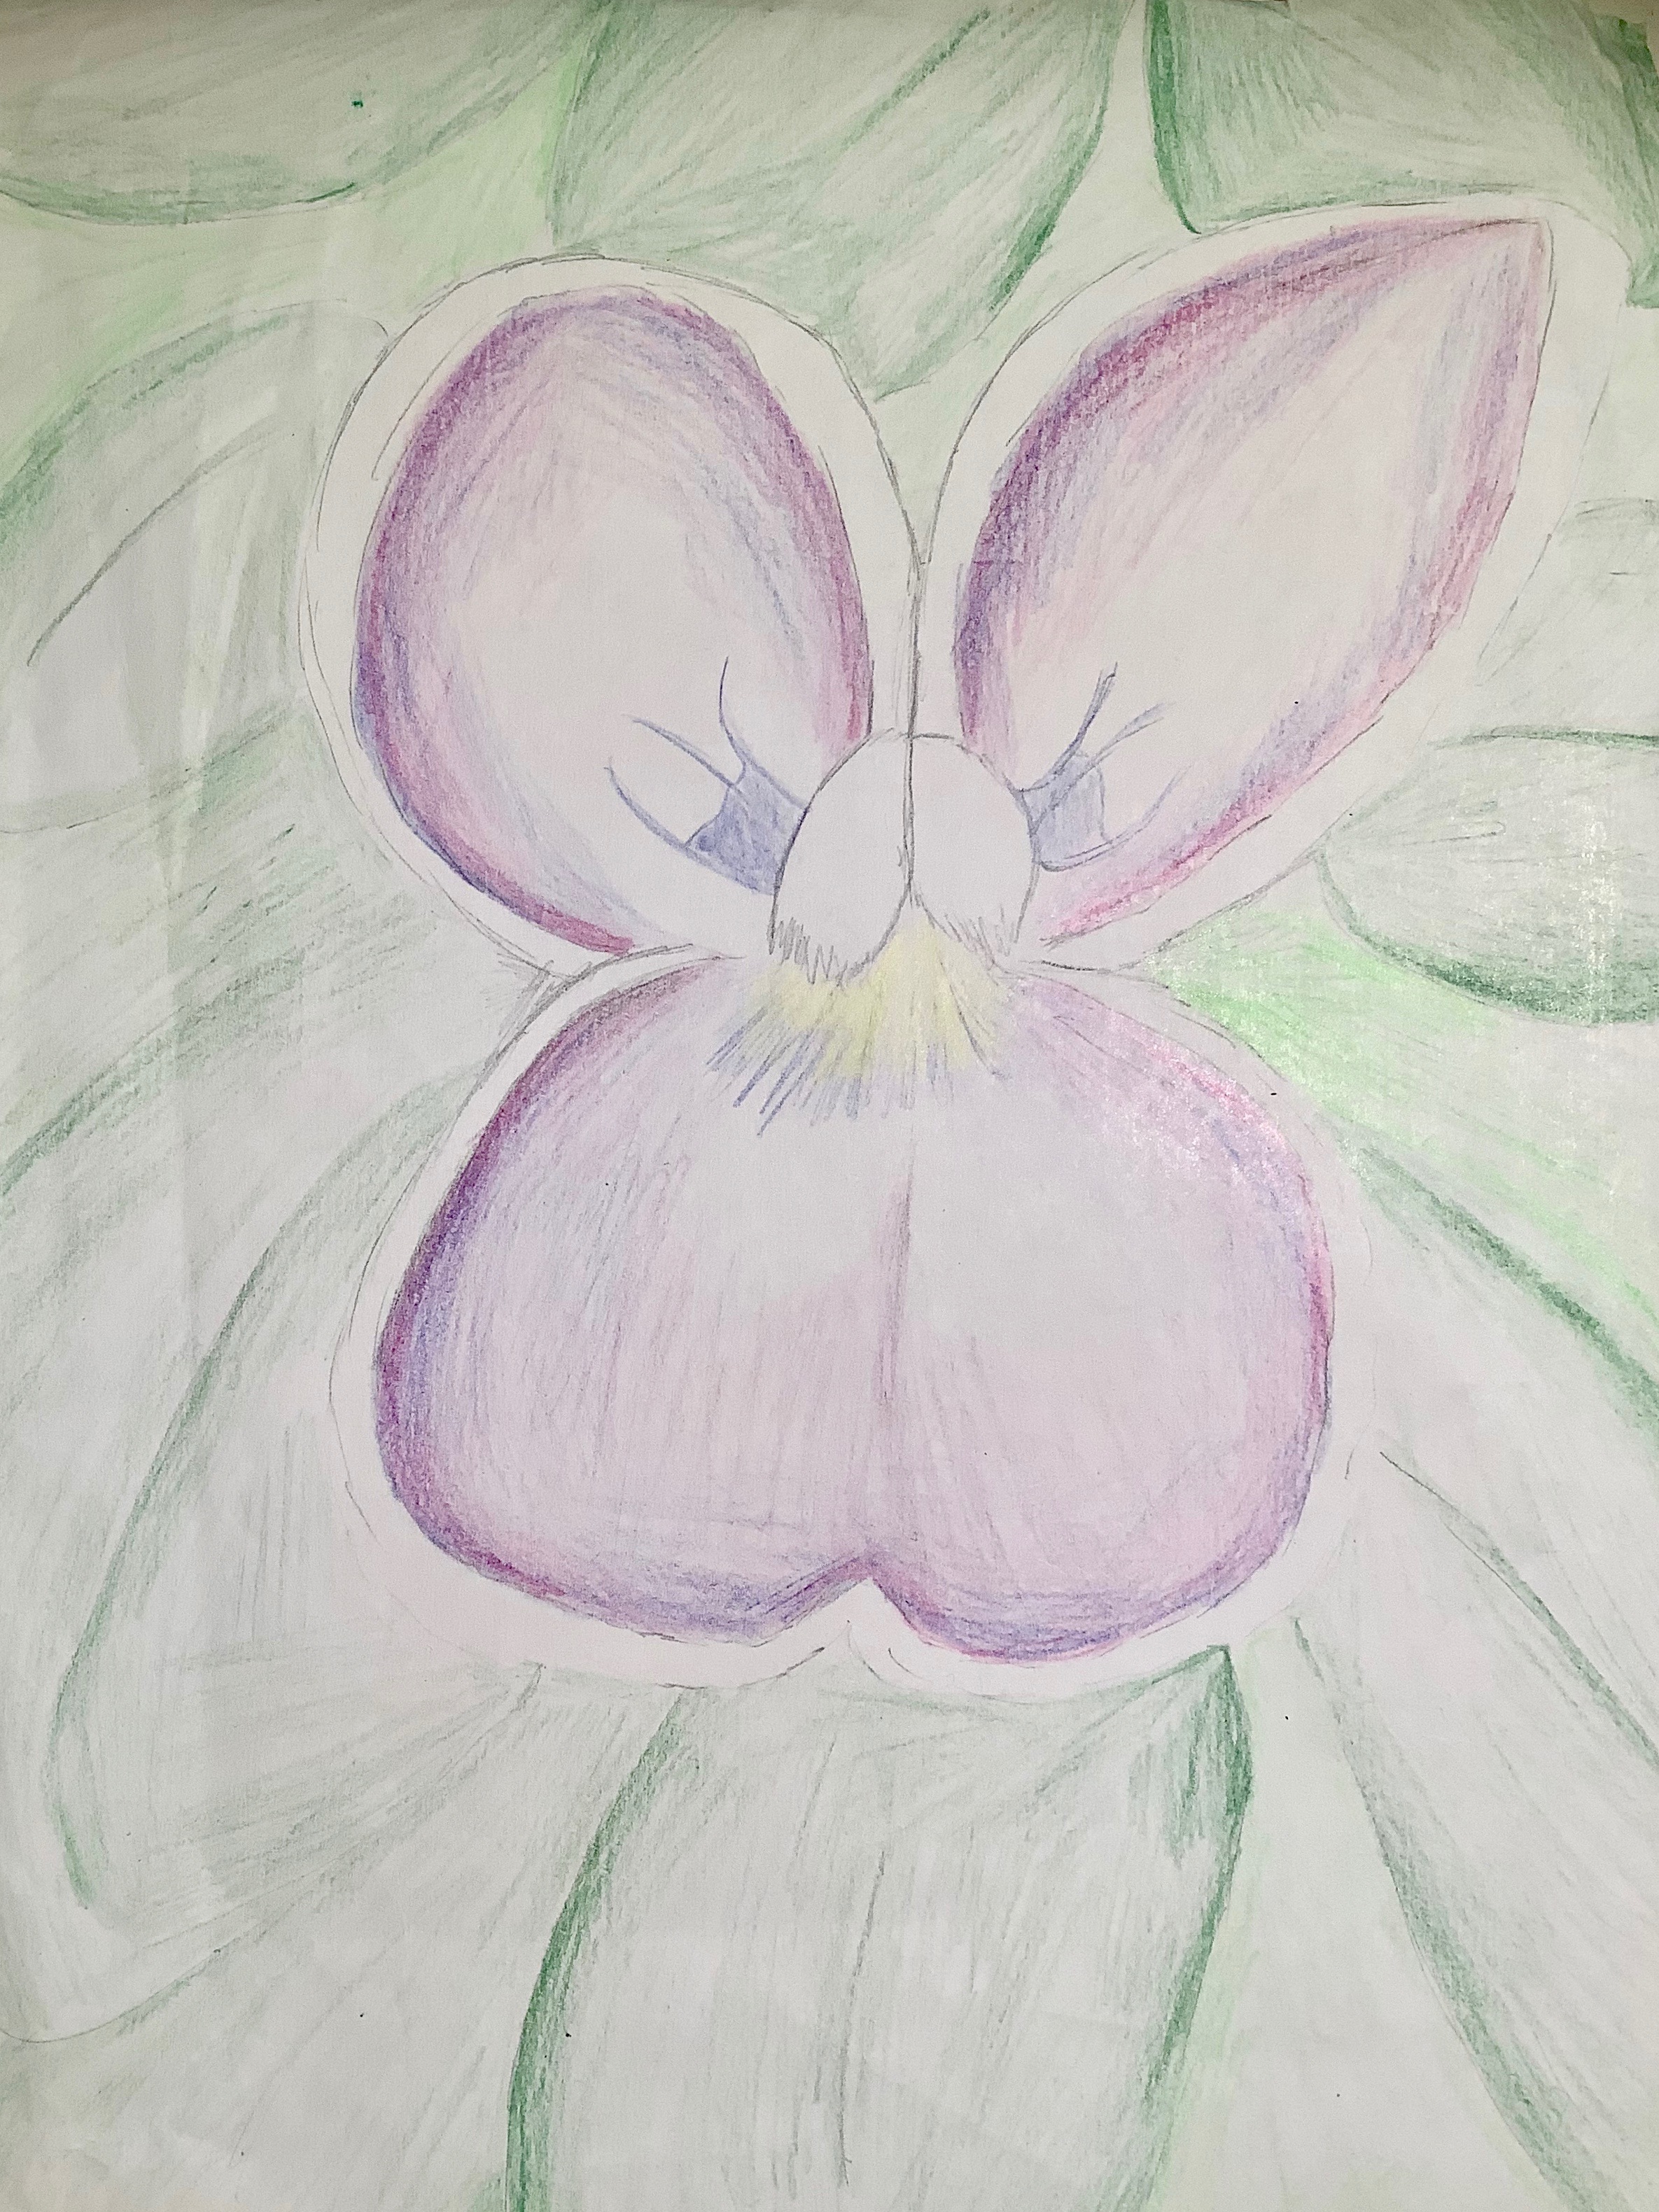 'Purple Flower Garden' by Lucy (13) from Offaly